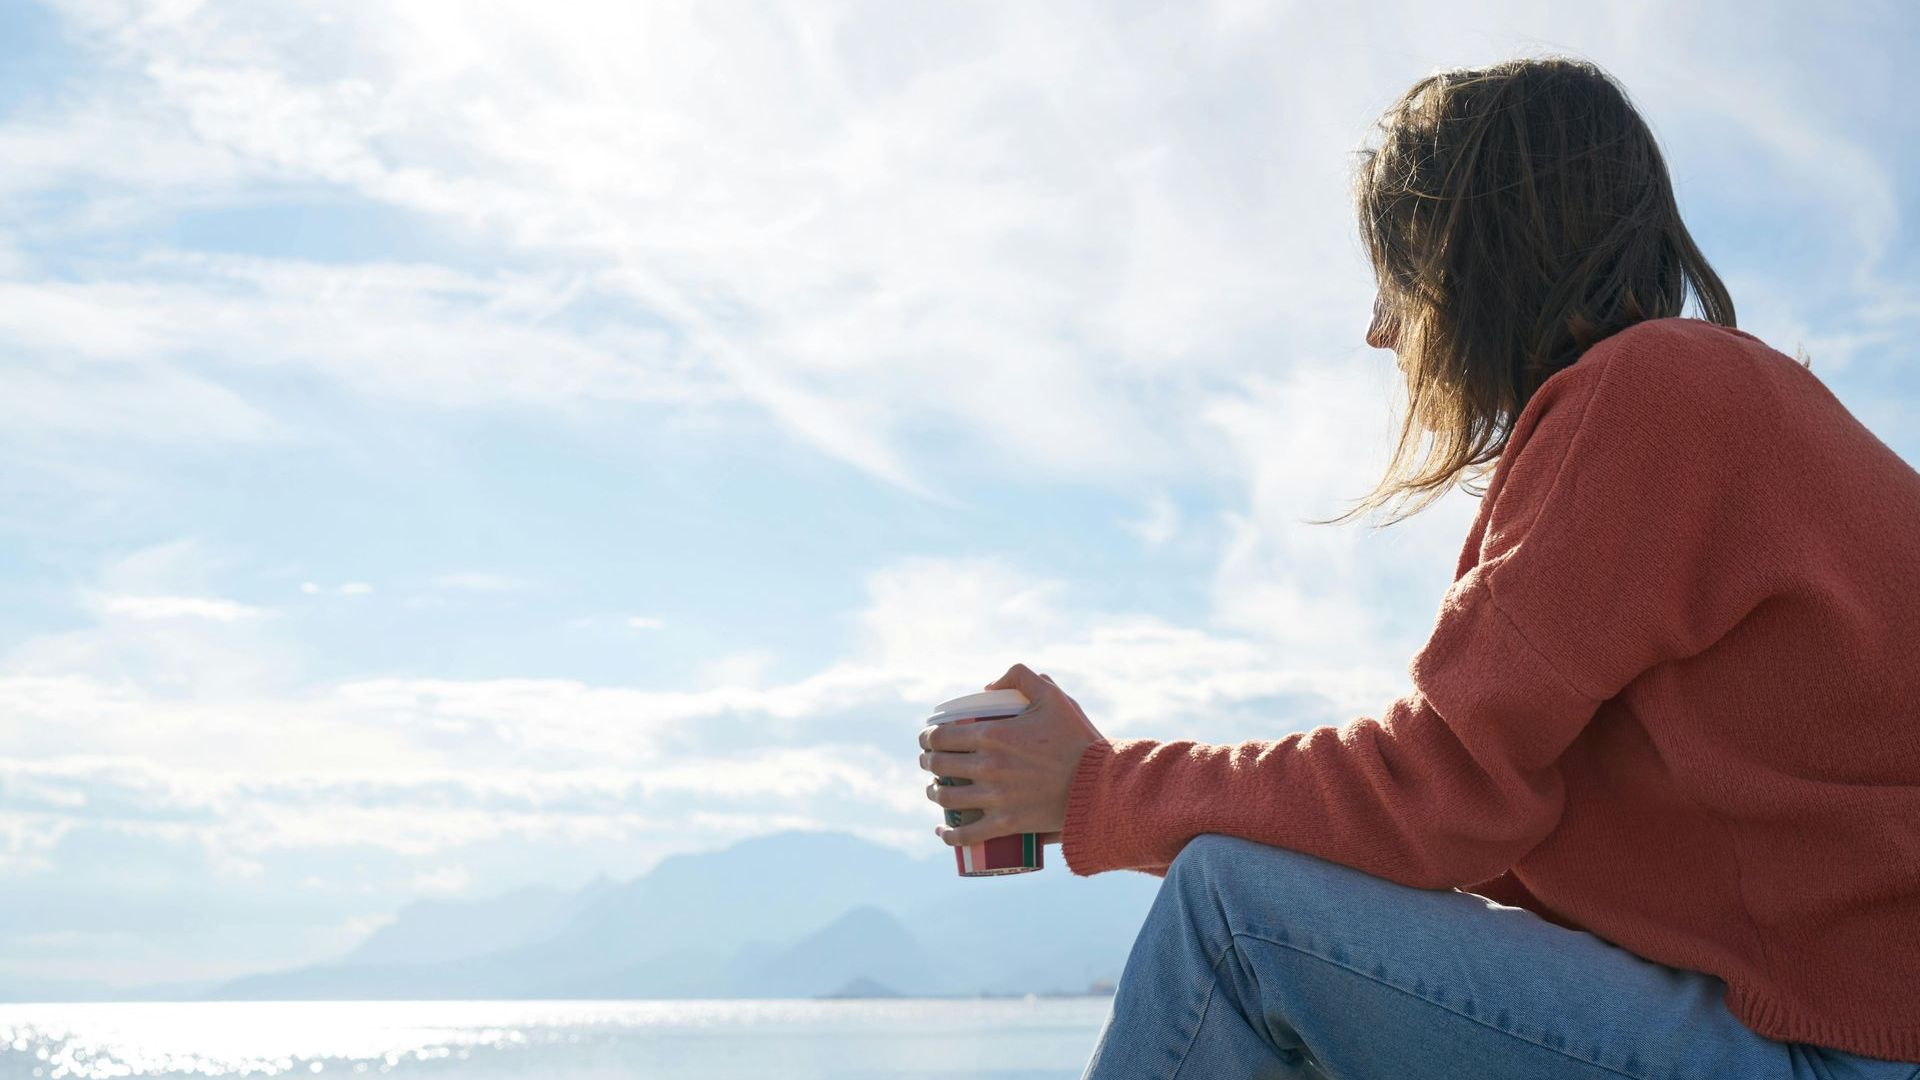 A woman is sitting on the edge of a cliff holding a cup of coffee.